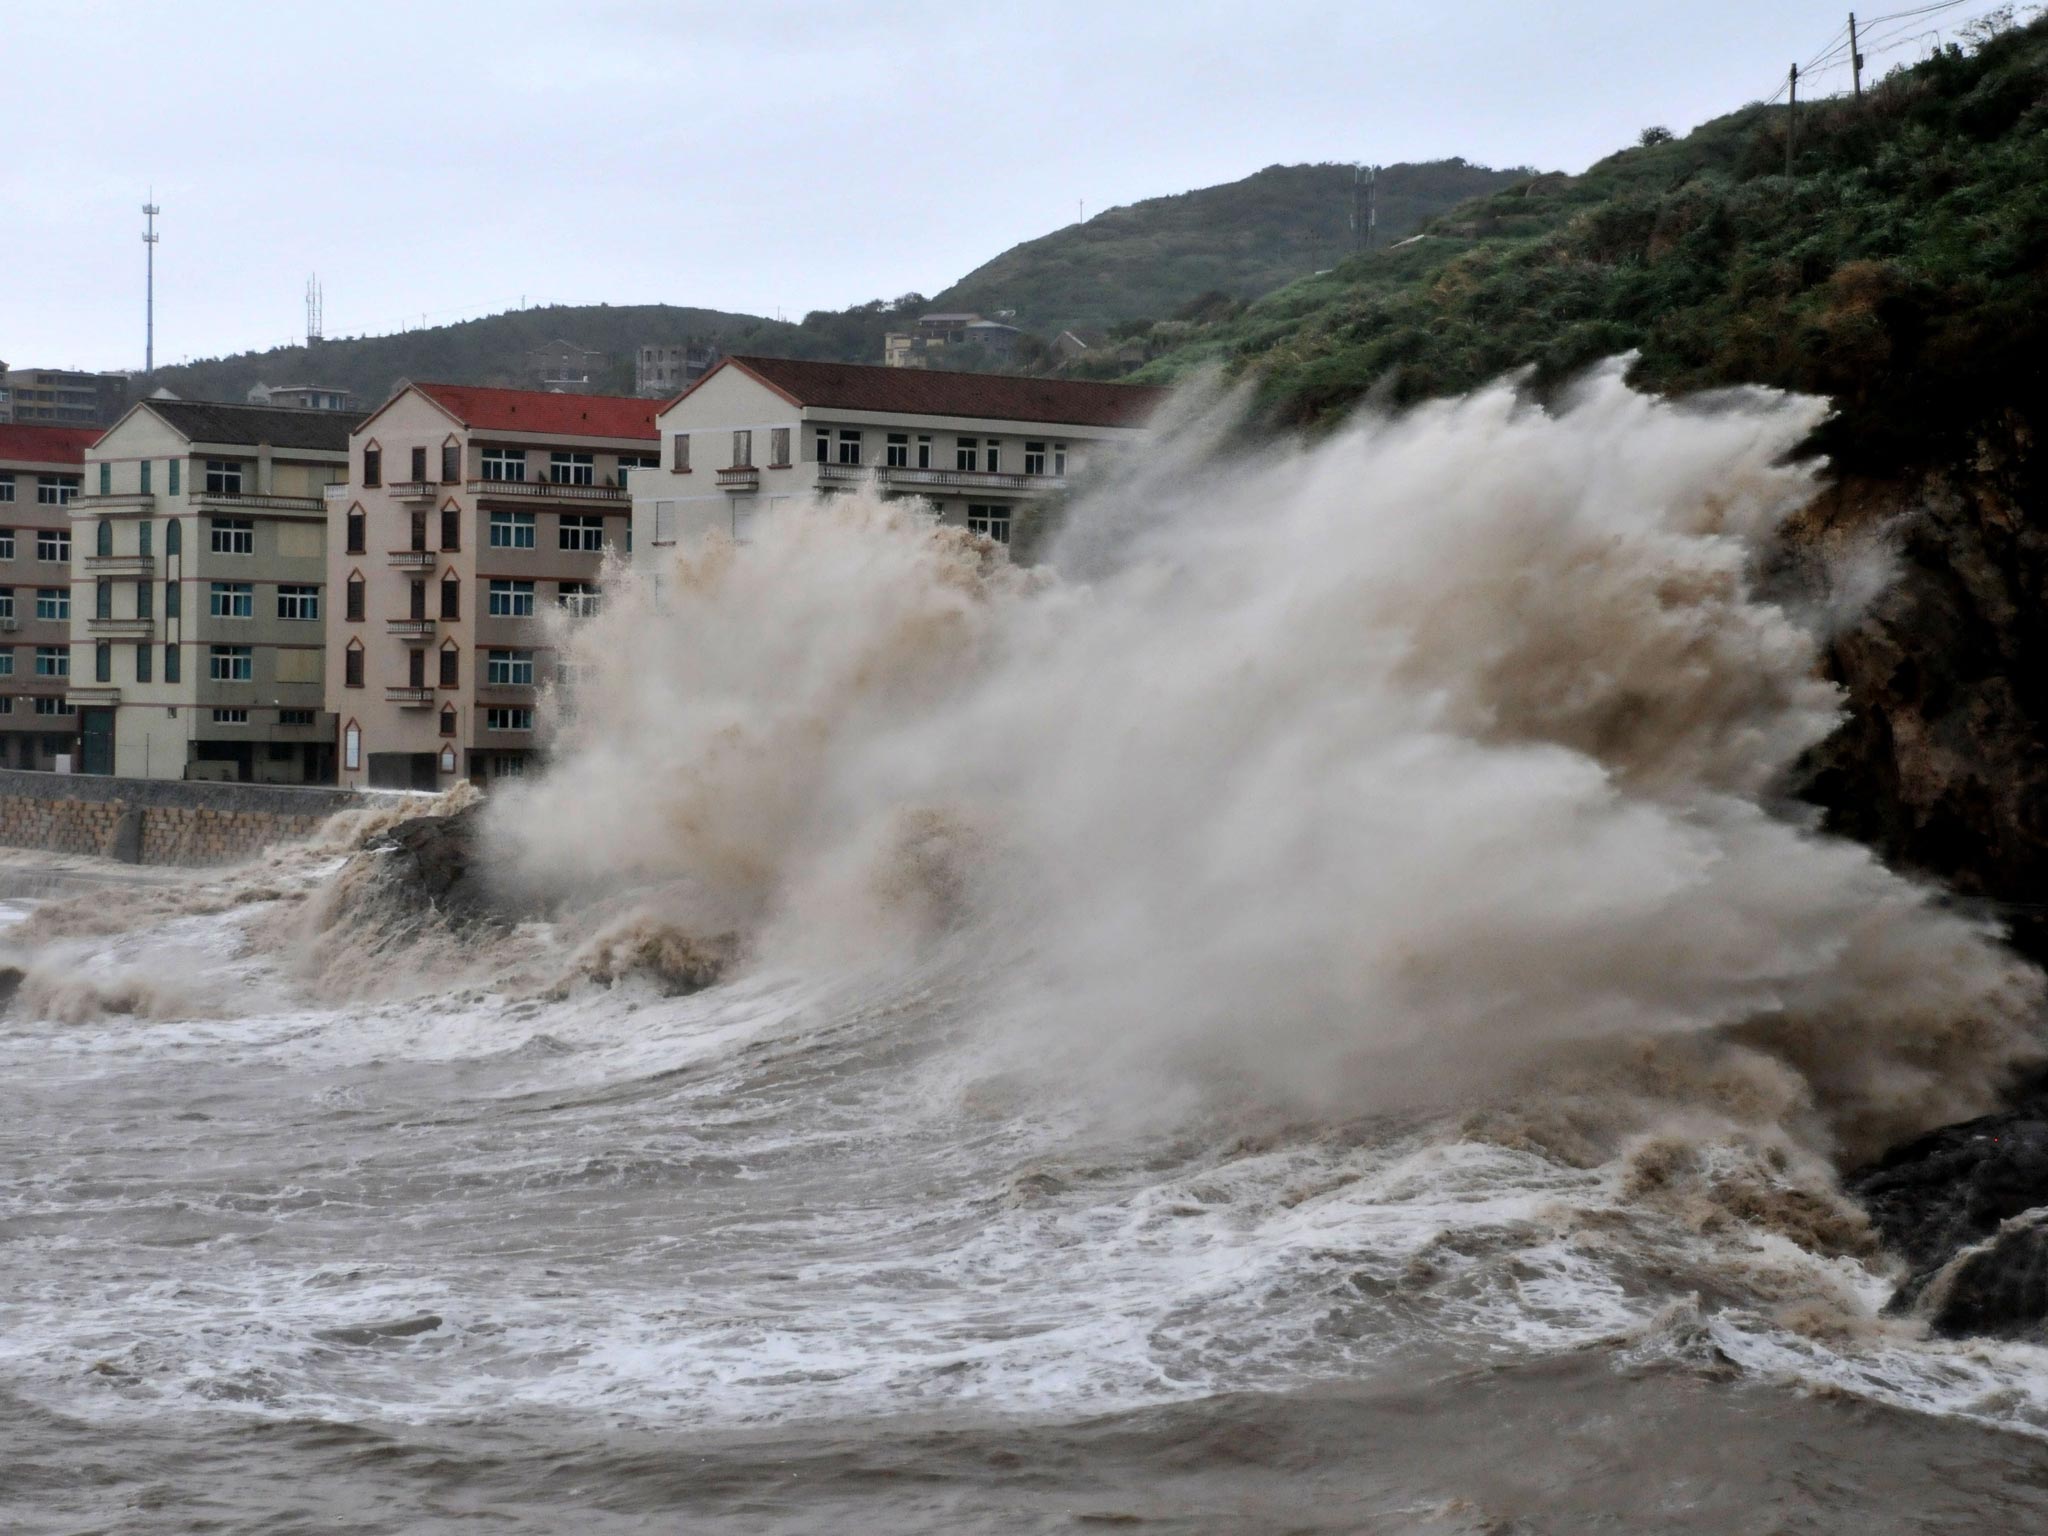 Huge waves hit the dike as Typhoon Fitow moves to make its landfall in east China's Zhejiang province